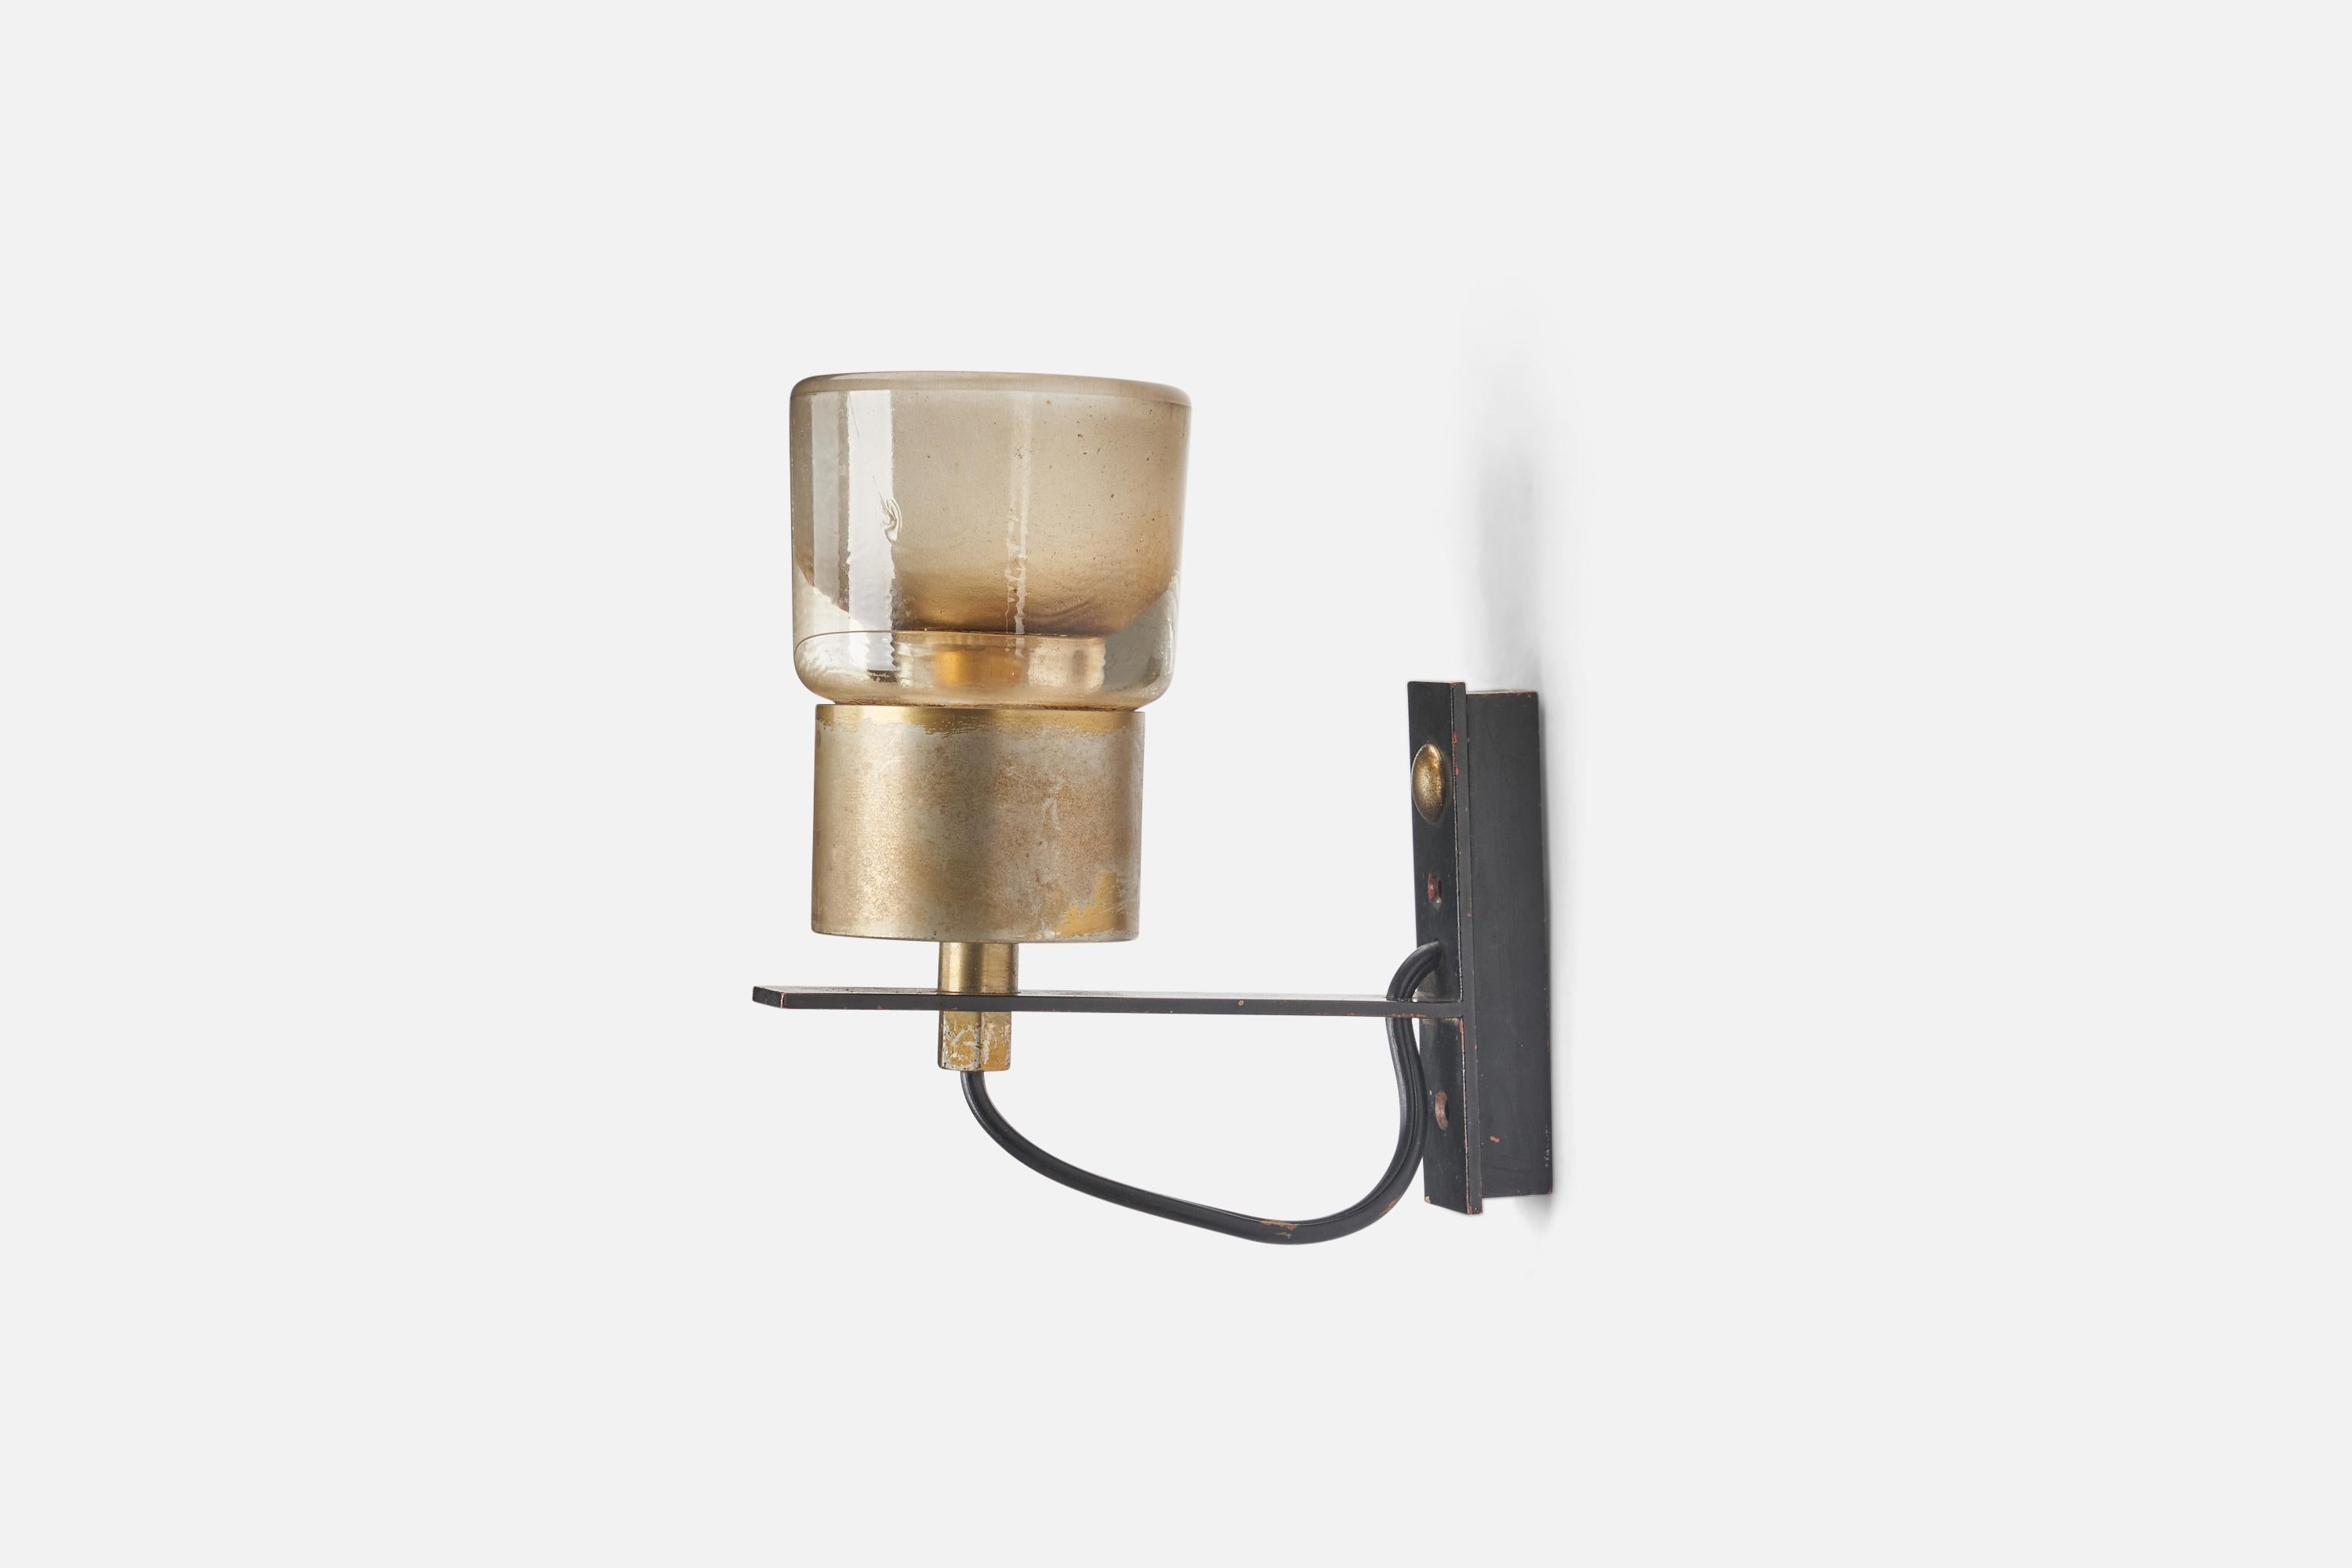 A pair of metal, glass, brass wall lights designed by Giuseppe Ostuni and produced by O-Luce, Italy, 1960s.

Dimensions of Back Plate (inches) : 3.9 x 0.9 x 0.7 (Height x Width x Depth)

Sockets take E-14 bulbs.

There is no maximum wattage